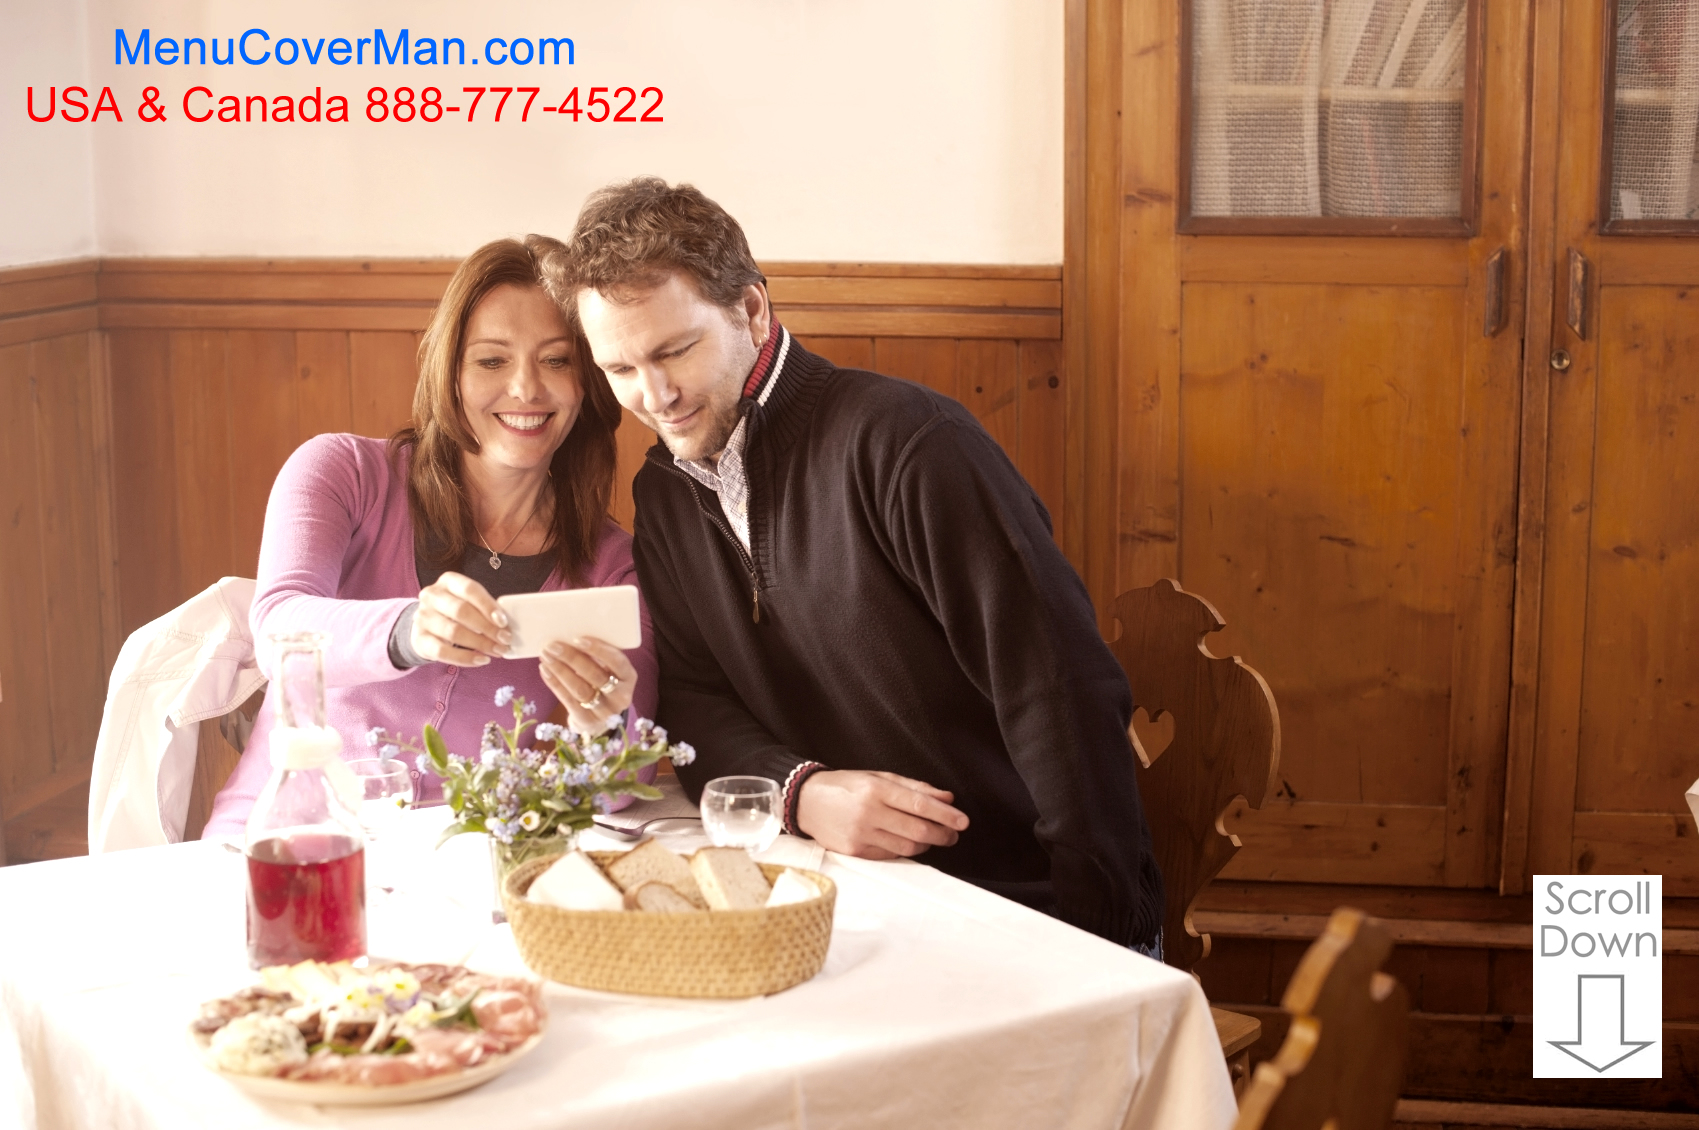 Happy couple ordering from the Pinehurst Menu Covers selection at Menucoverman.com.